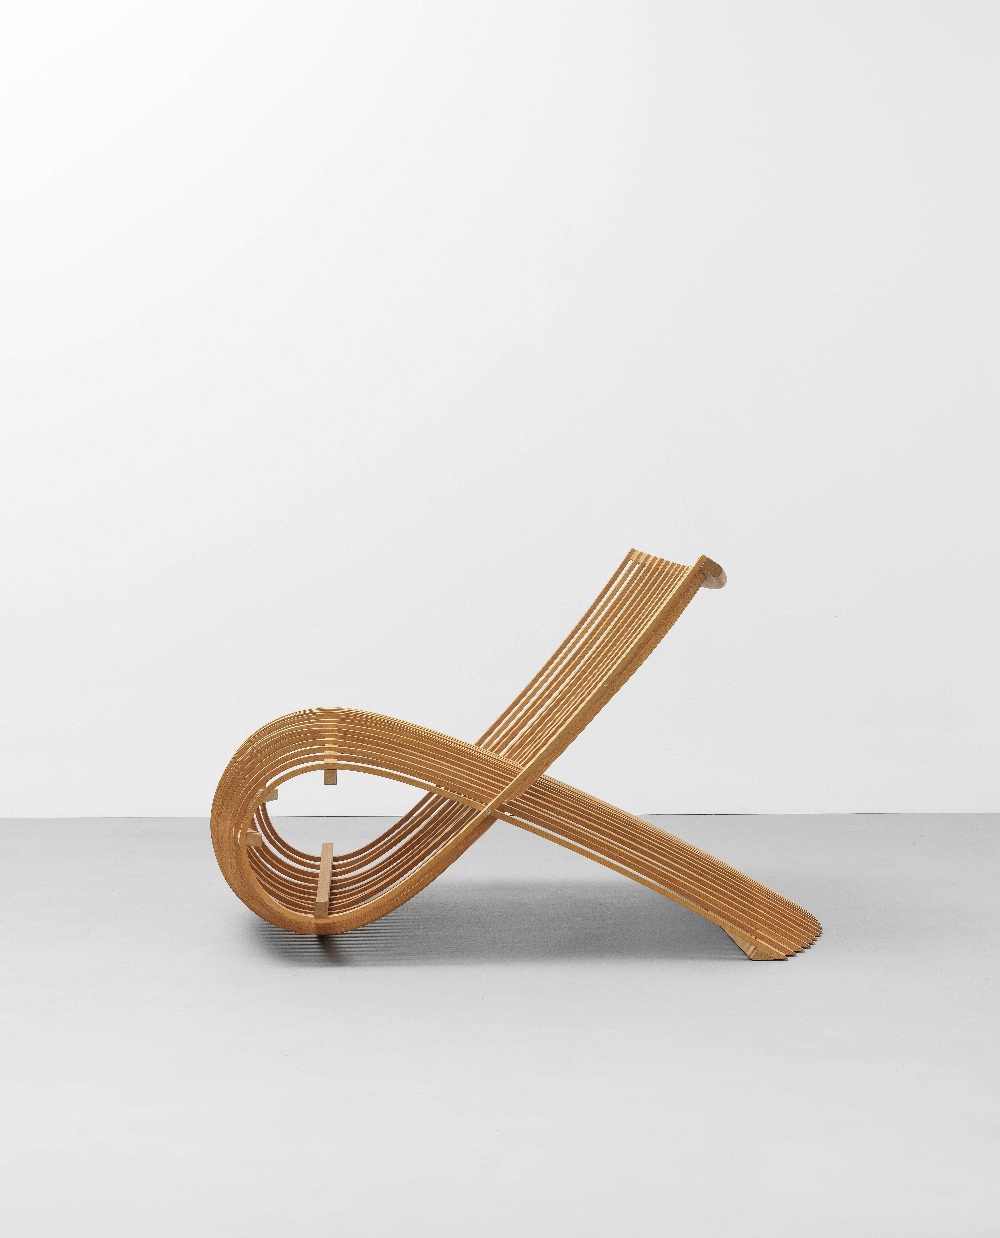 Marc Newson 'Wood' chair, designed 1988 - Image 3 of 3